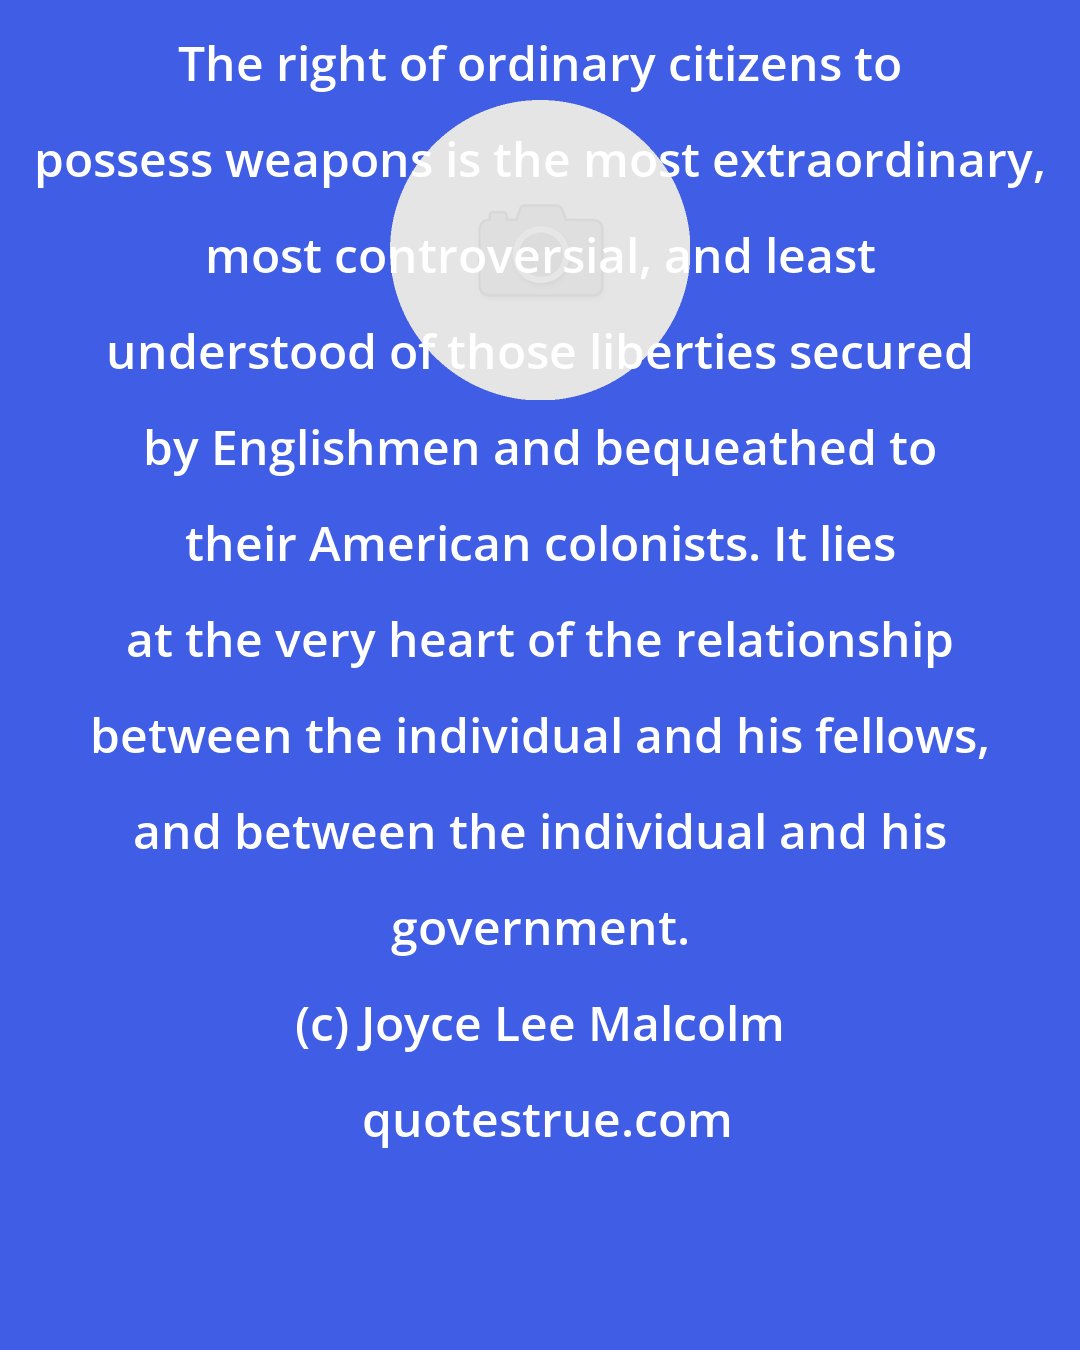 Joyce Lee Malcolm: The right of ordinary citizens to possess weapons is the most extraordinary, most controversial, and least understood of those liberties secured by Englishmen and bequeathed to their American colonists. It lies at the very heart of the relationship between the individual and his fellows, and between the individual and his government.